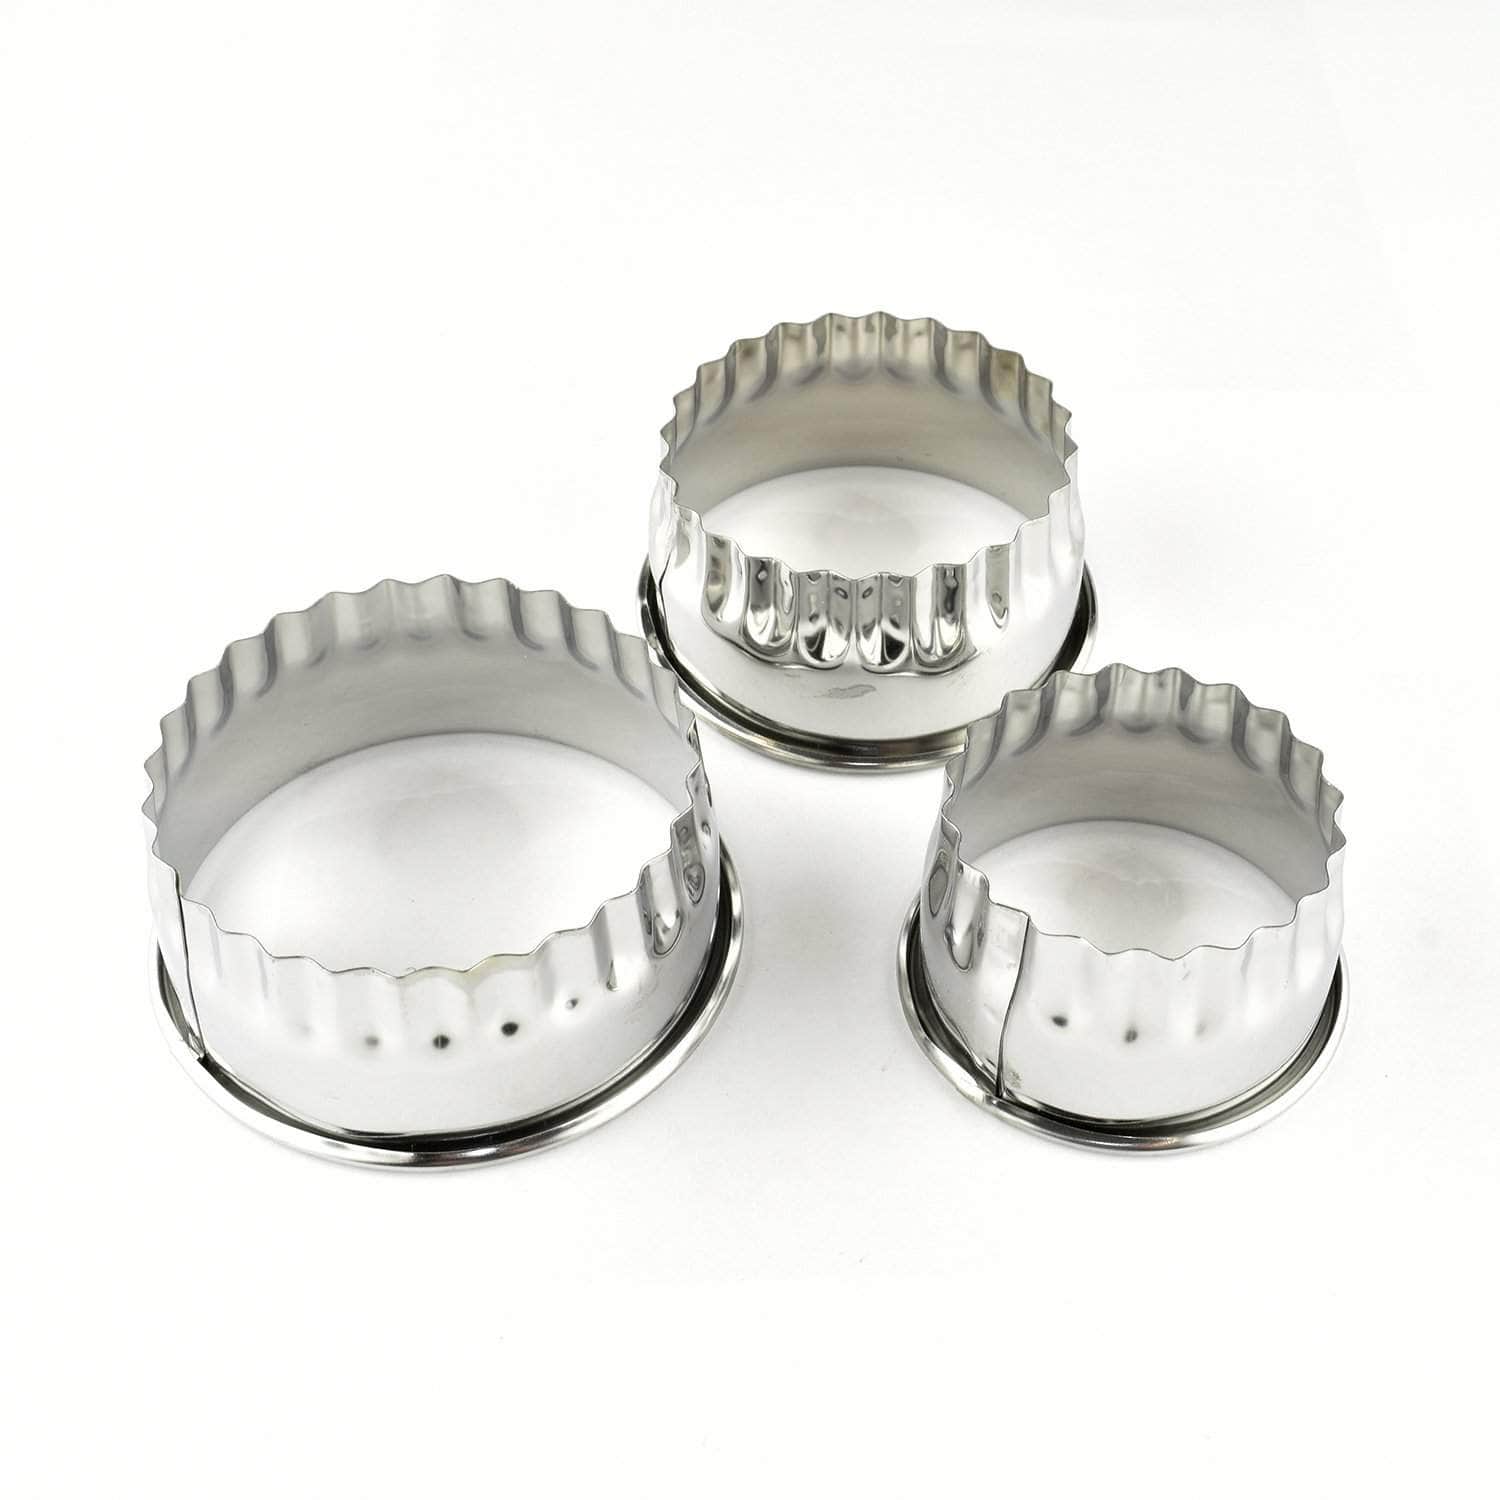 *New* Pastry cutters, set of 3